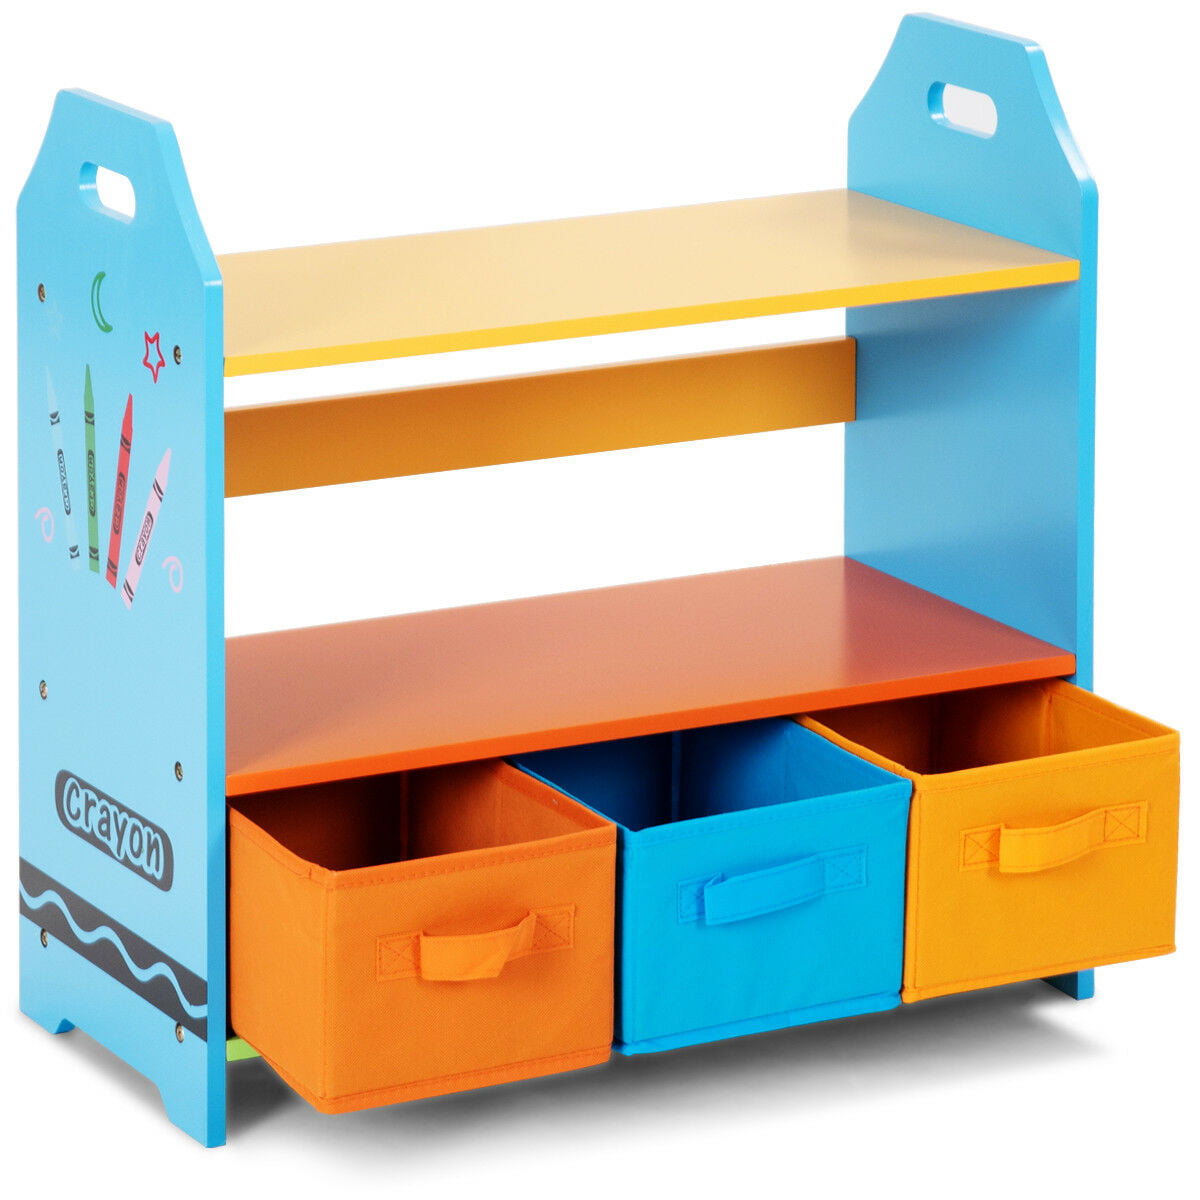 Gymax 2 Tiers Crayon Themed Bookshelf Toddler Size Shelves